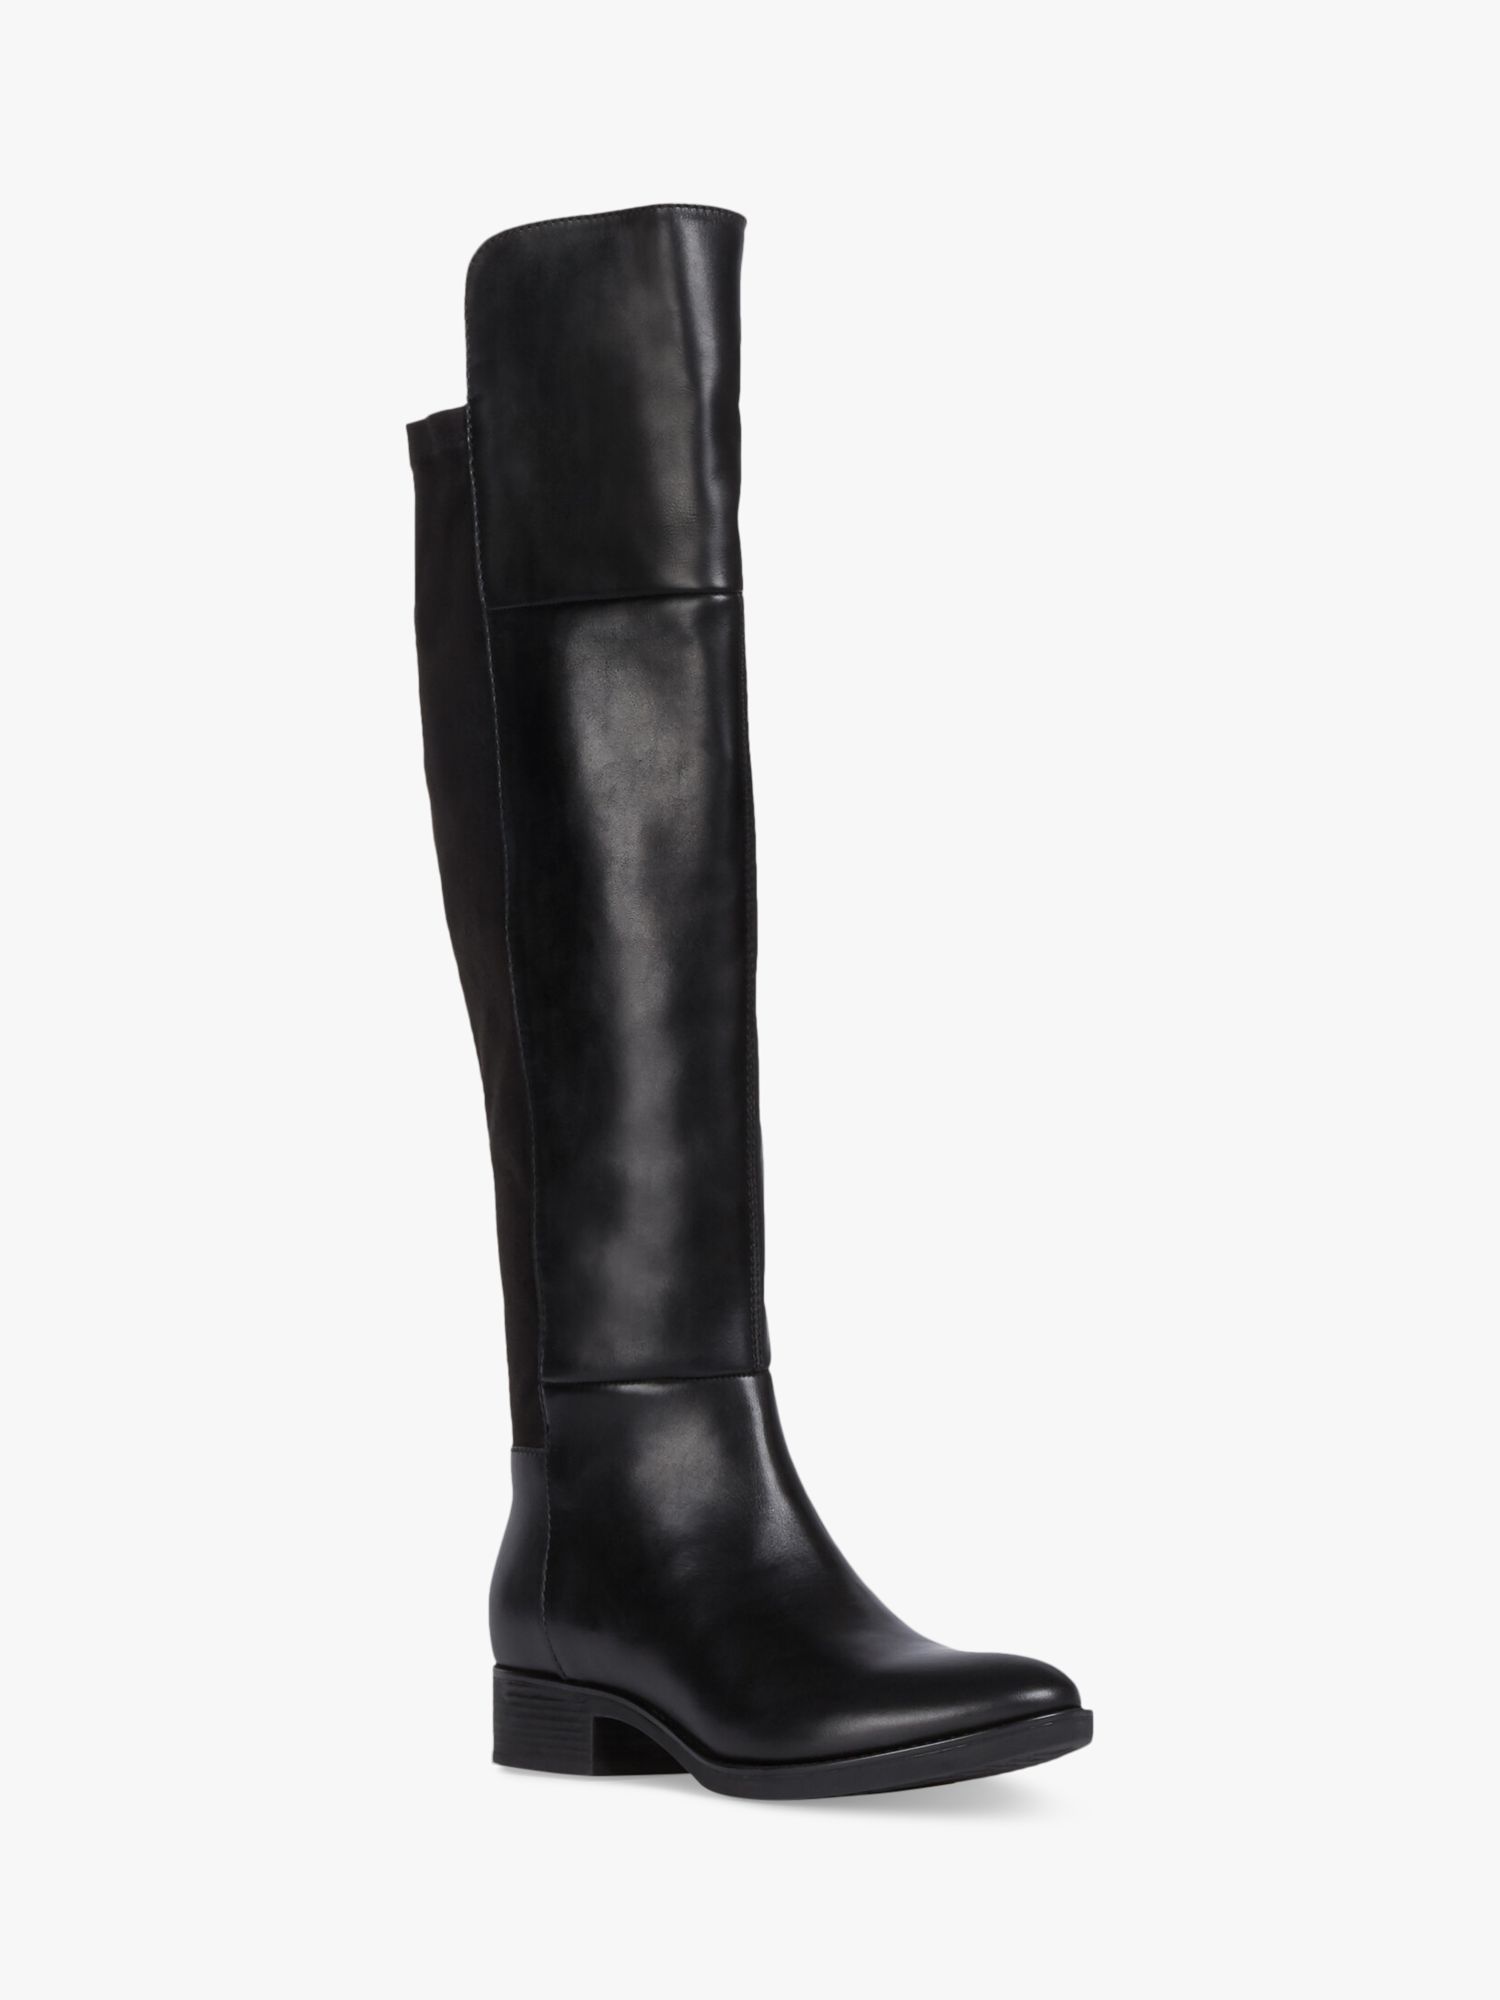 Geox Women's Felicity Leather Over the Knee Boots, Black at John Lewis ...